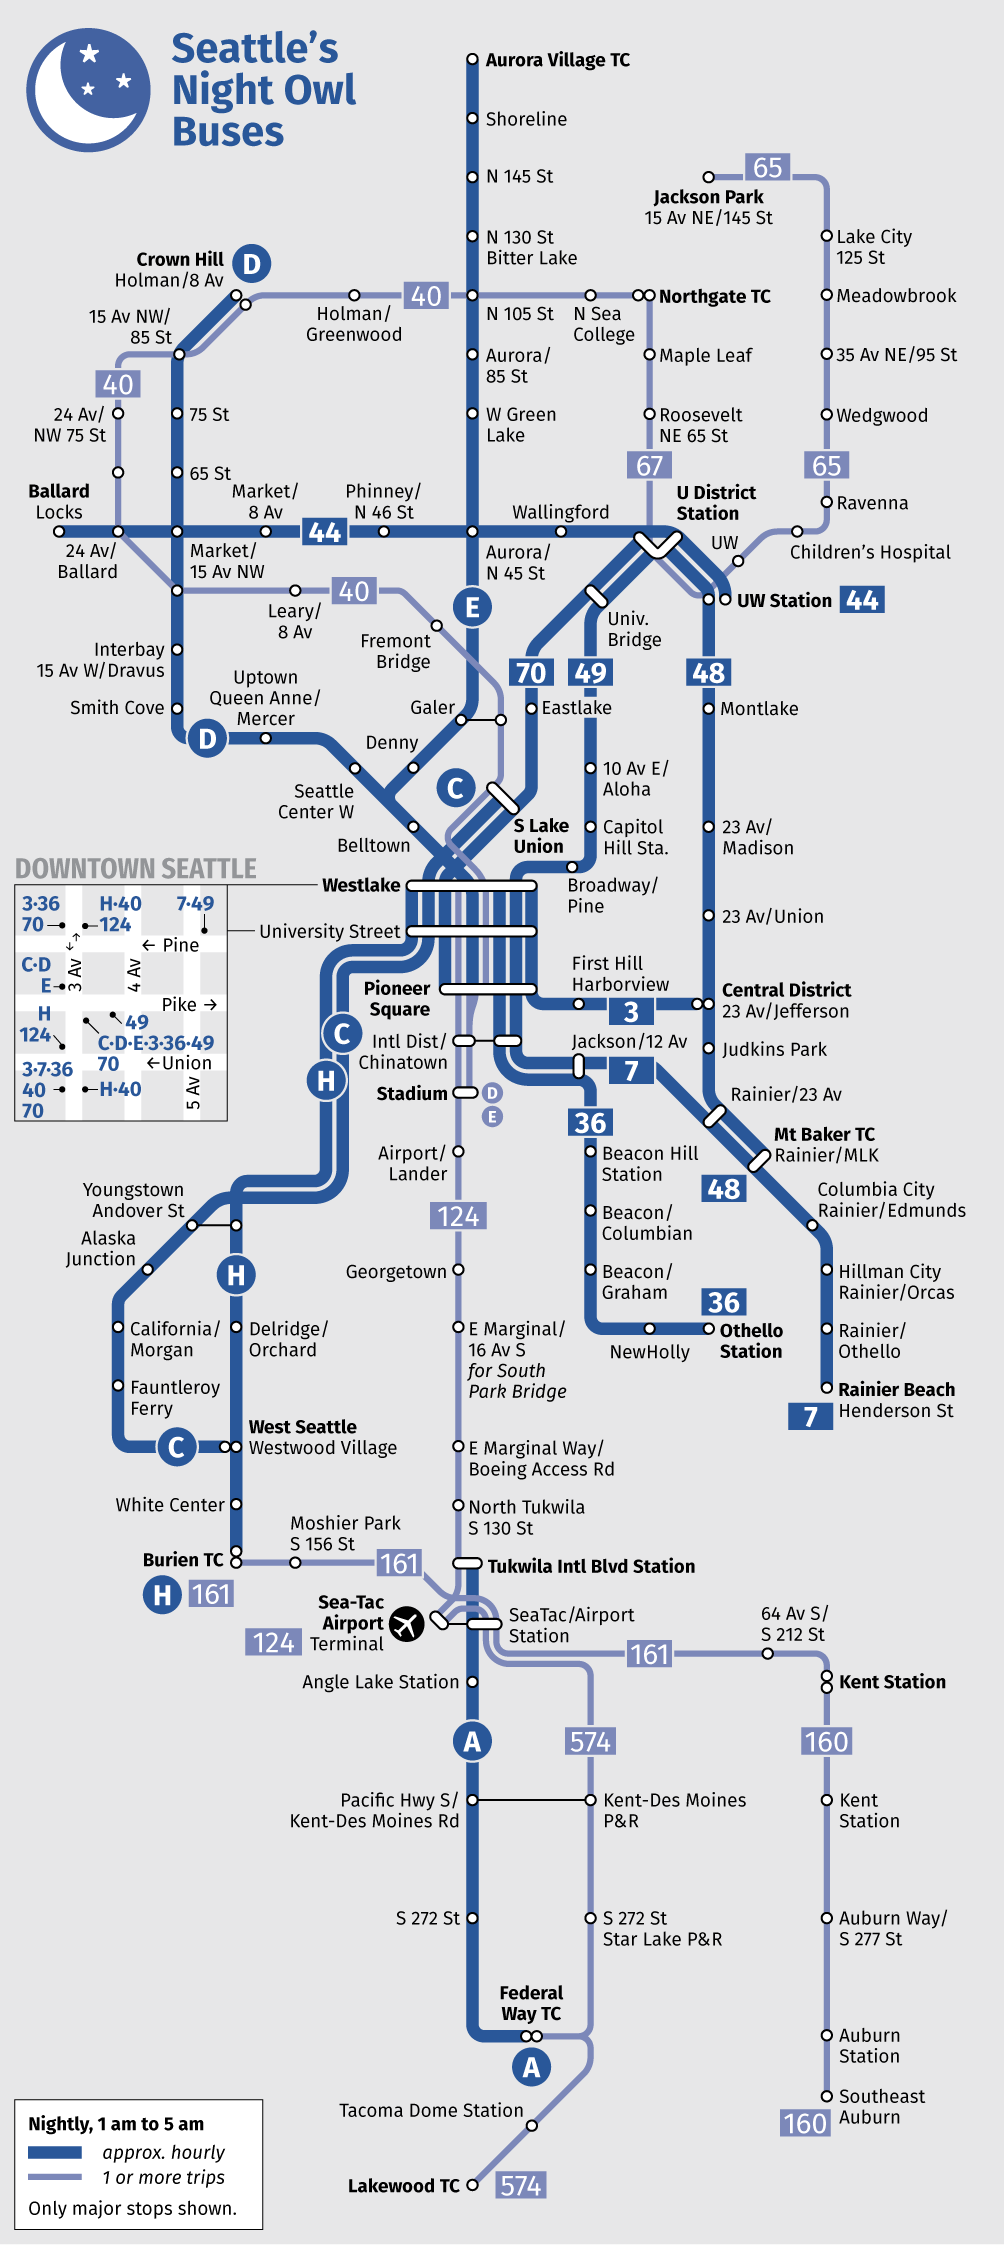 Diagram of Seattle's Night Owl Services